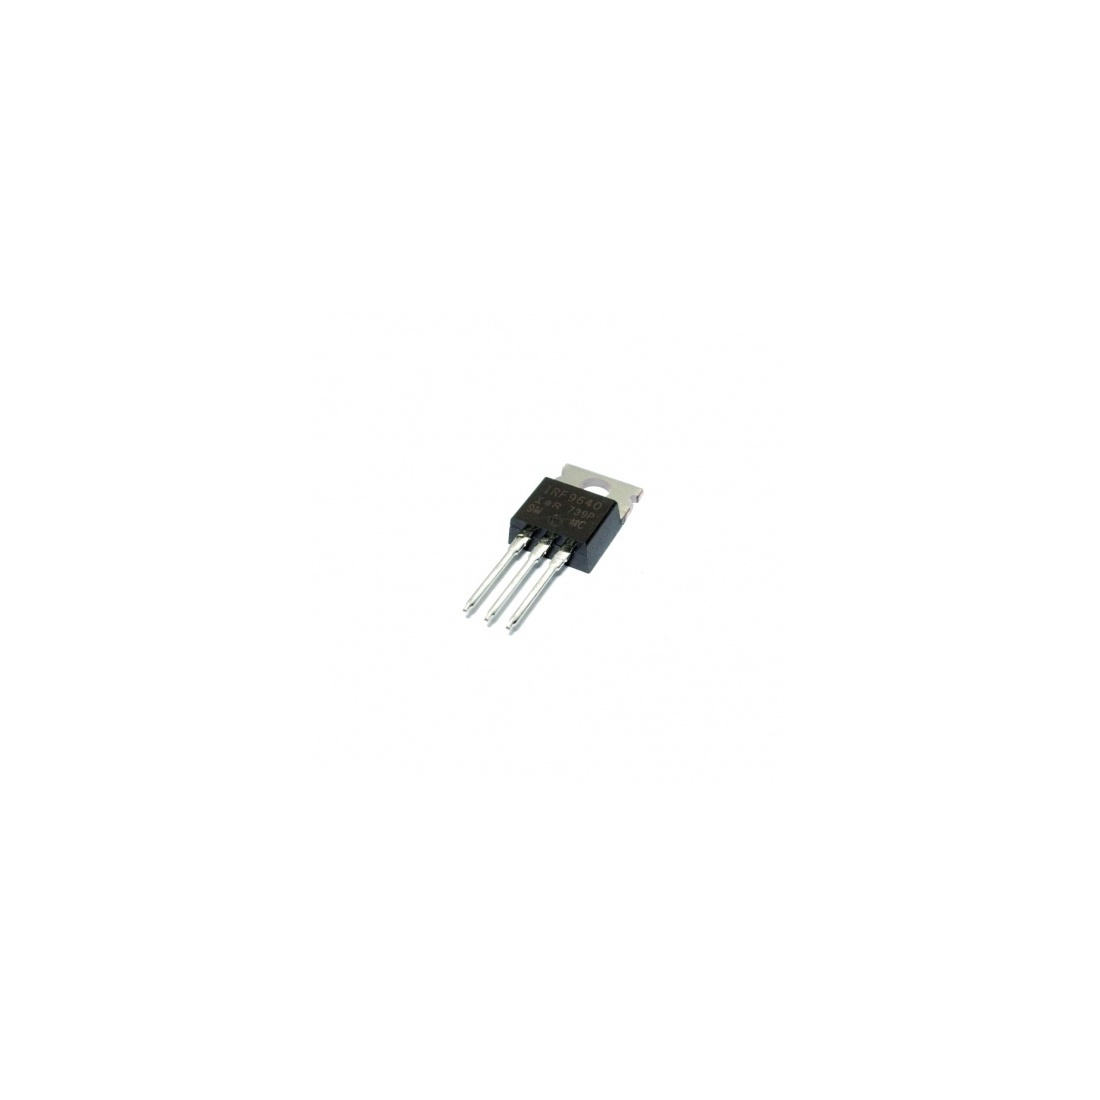 5 x IRF9640 Power MOSFET P-Channel 11A 200V  new